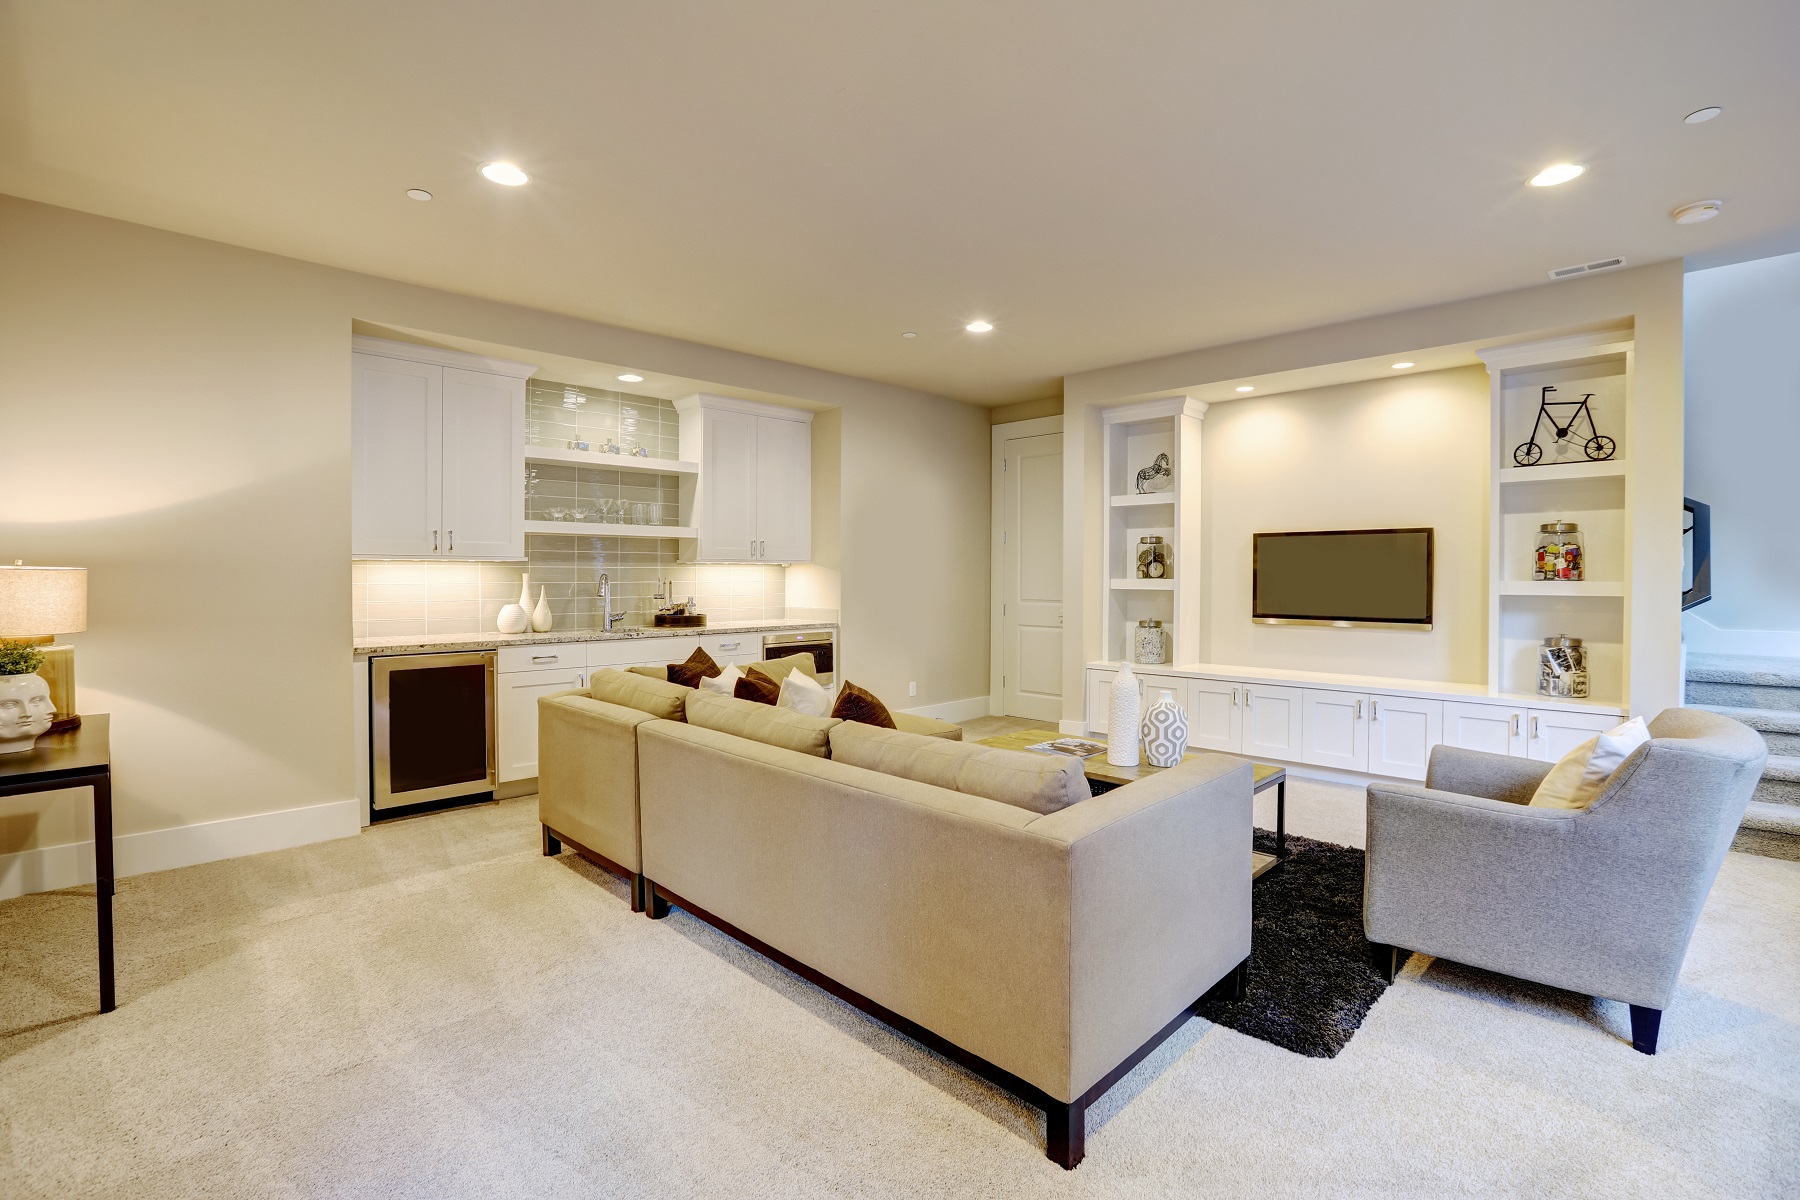 2021 Basement Remodel Average Cost And Prices